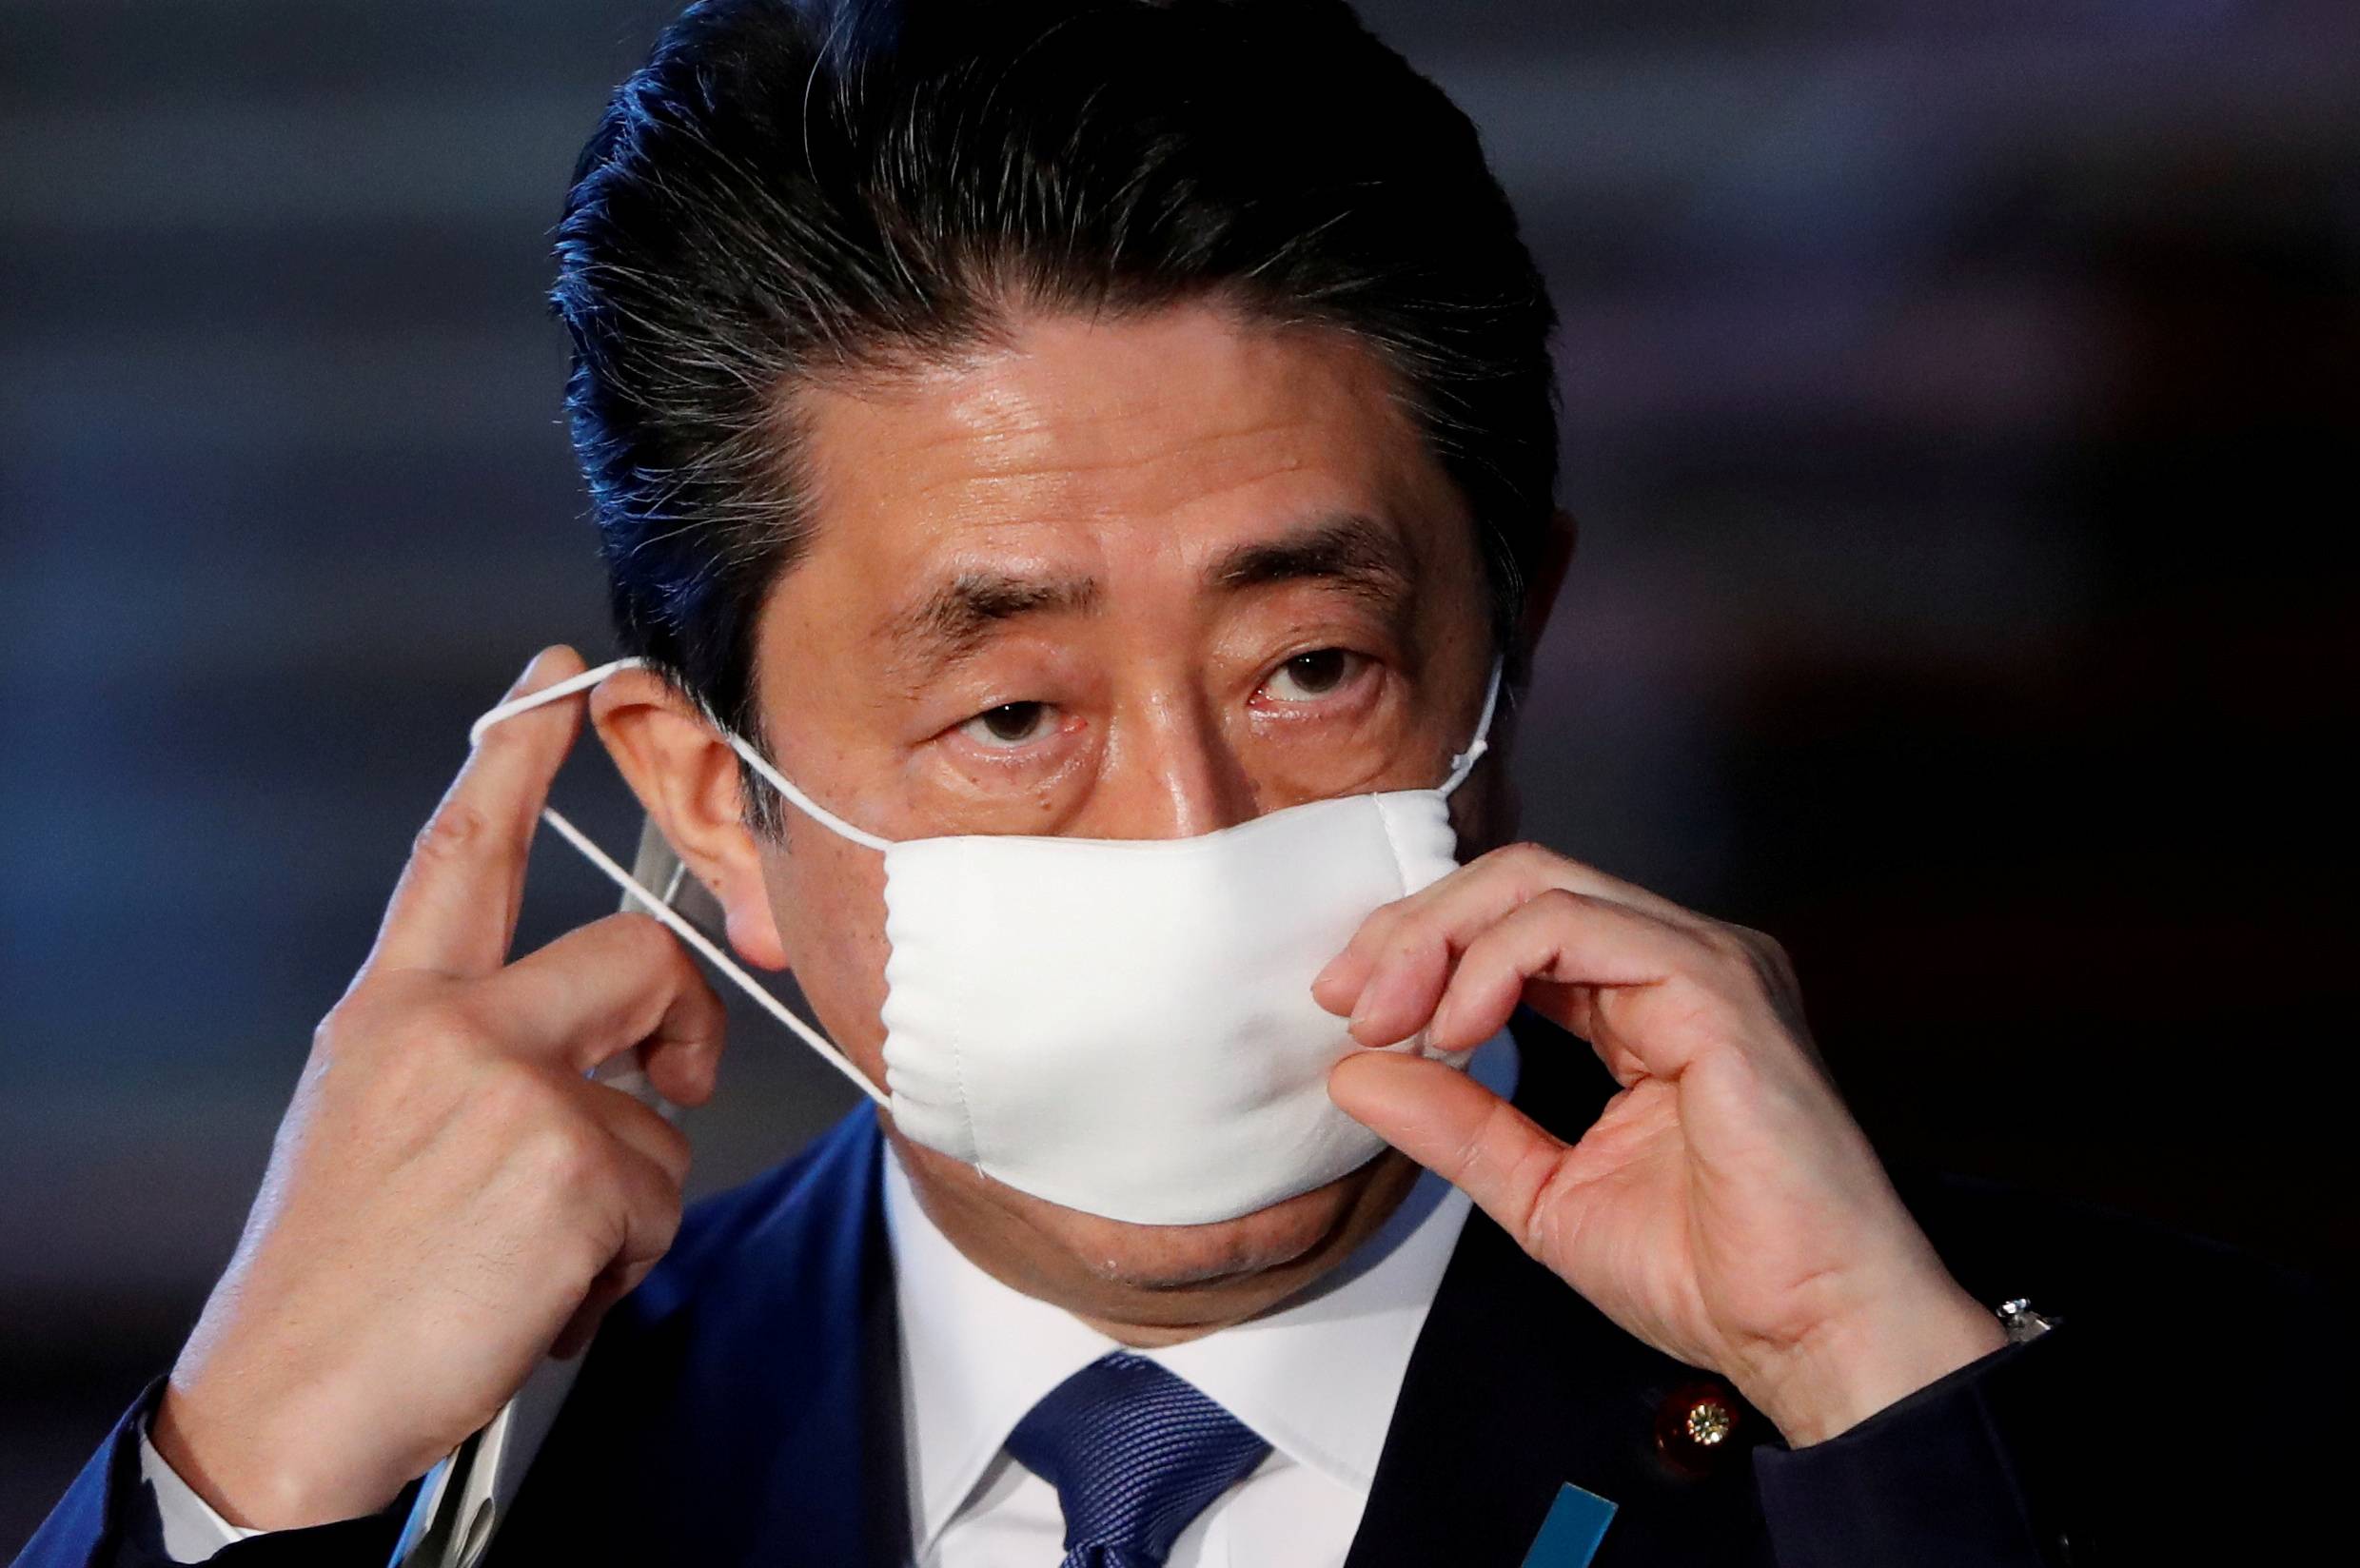 Prime Minister Shinzo Abe arrives at his official residence in Tokyo on April 6 to address the media on the government’s response to the coronavirus outbreak. | REUTERS